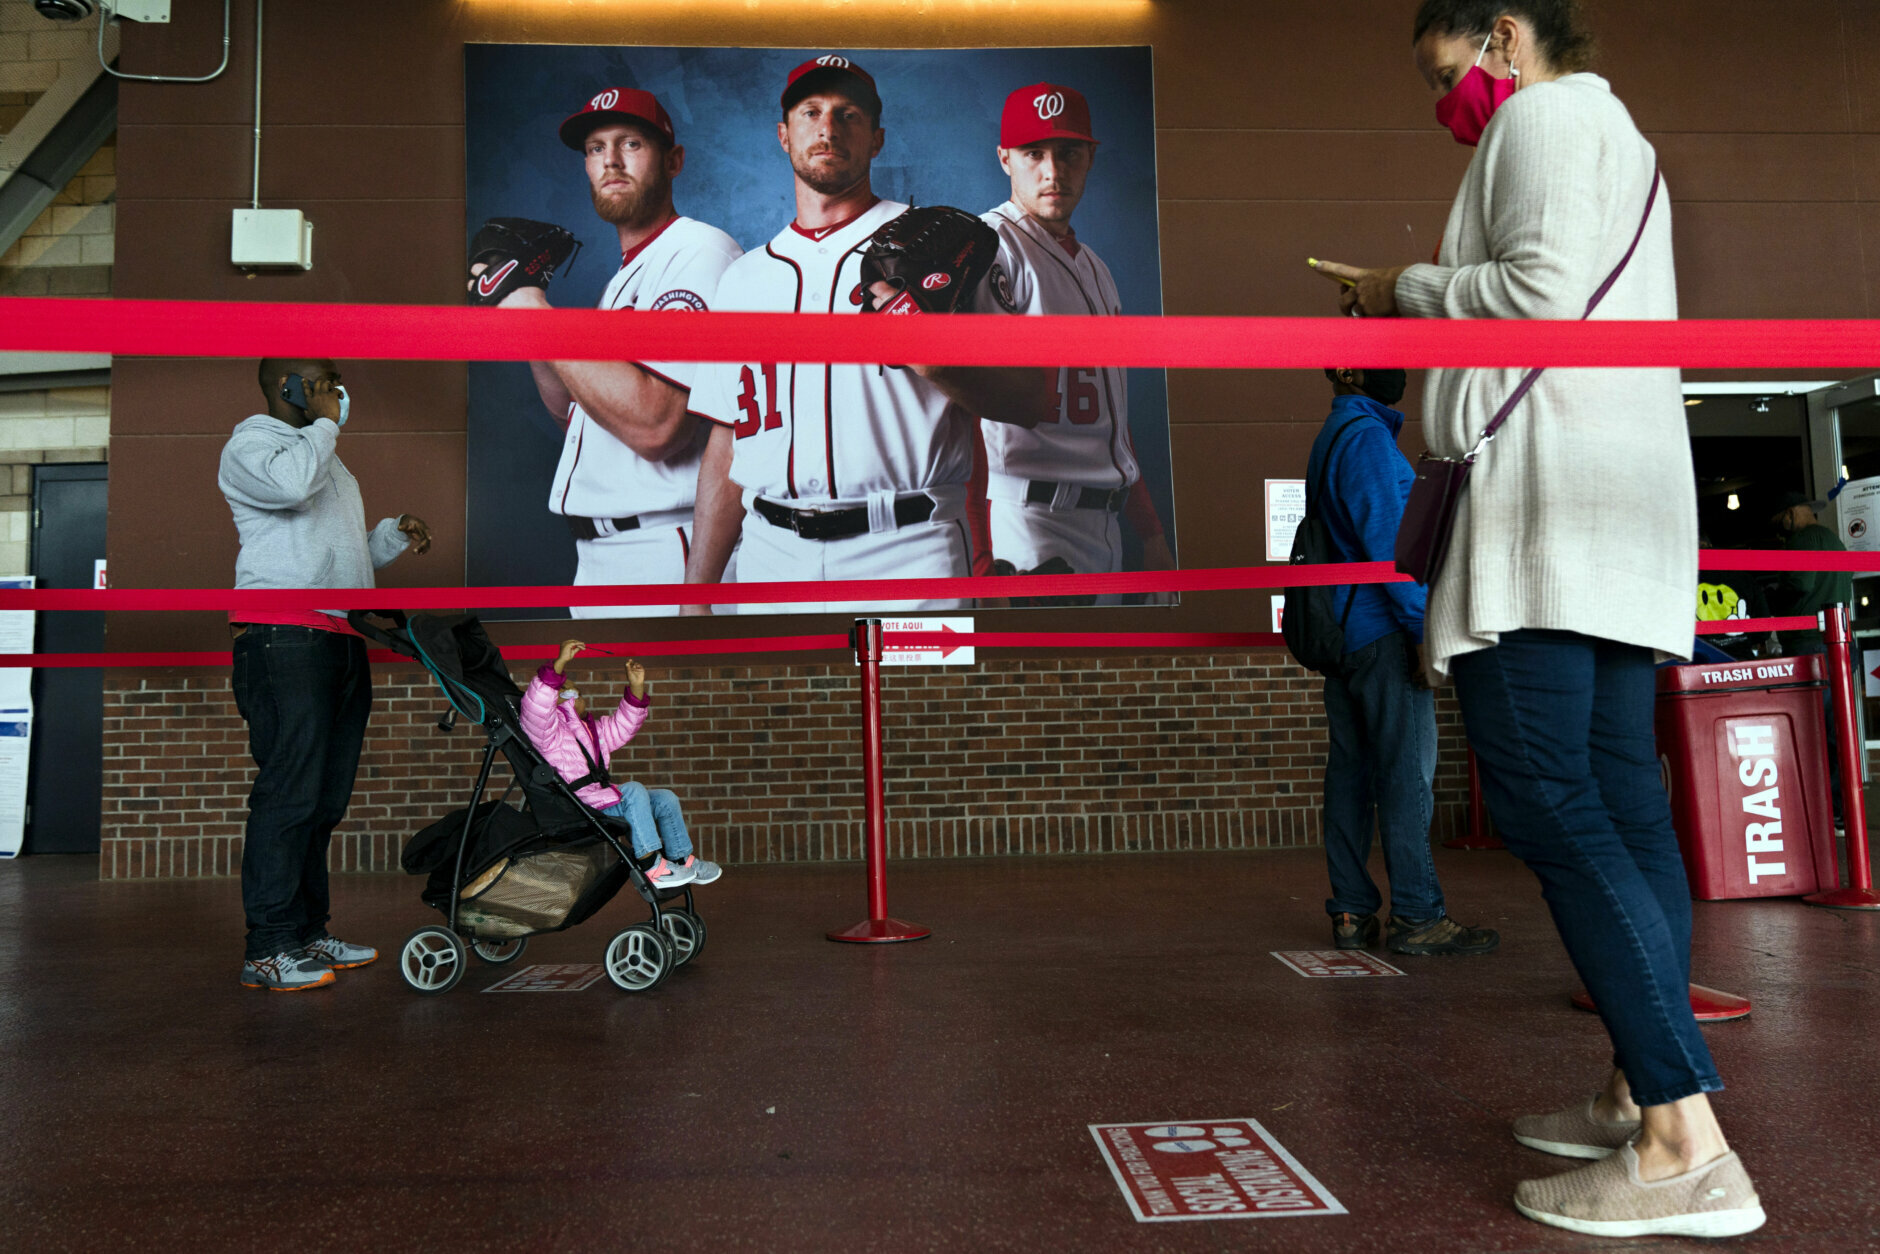 Early voting begins in the District of Columbia as voters wait in line at an early voting center at Nationals Park, Tuesday, Oct. 27, 2020, in Washington. (AP Photo/Jacquelyn Martin)